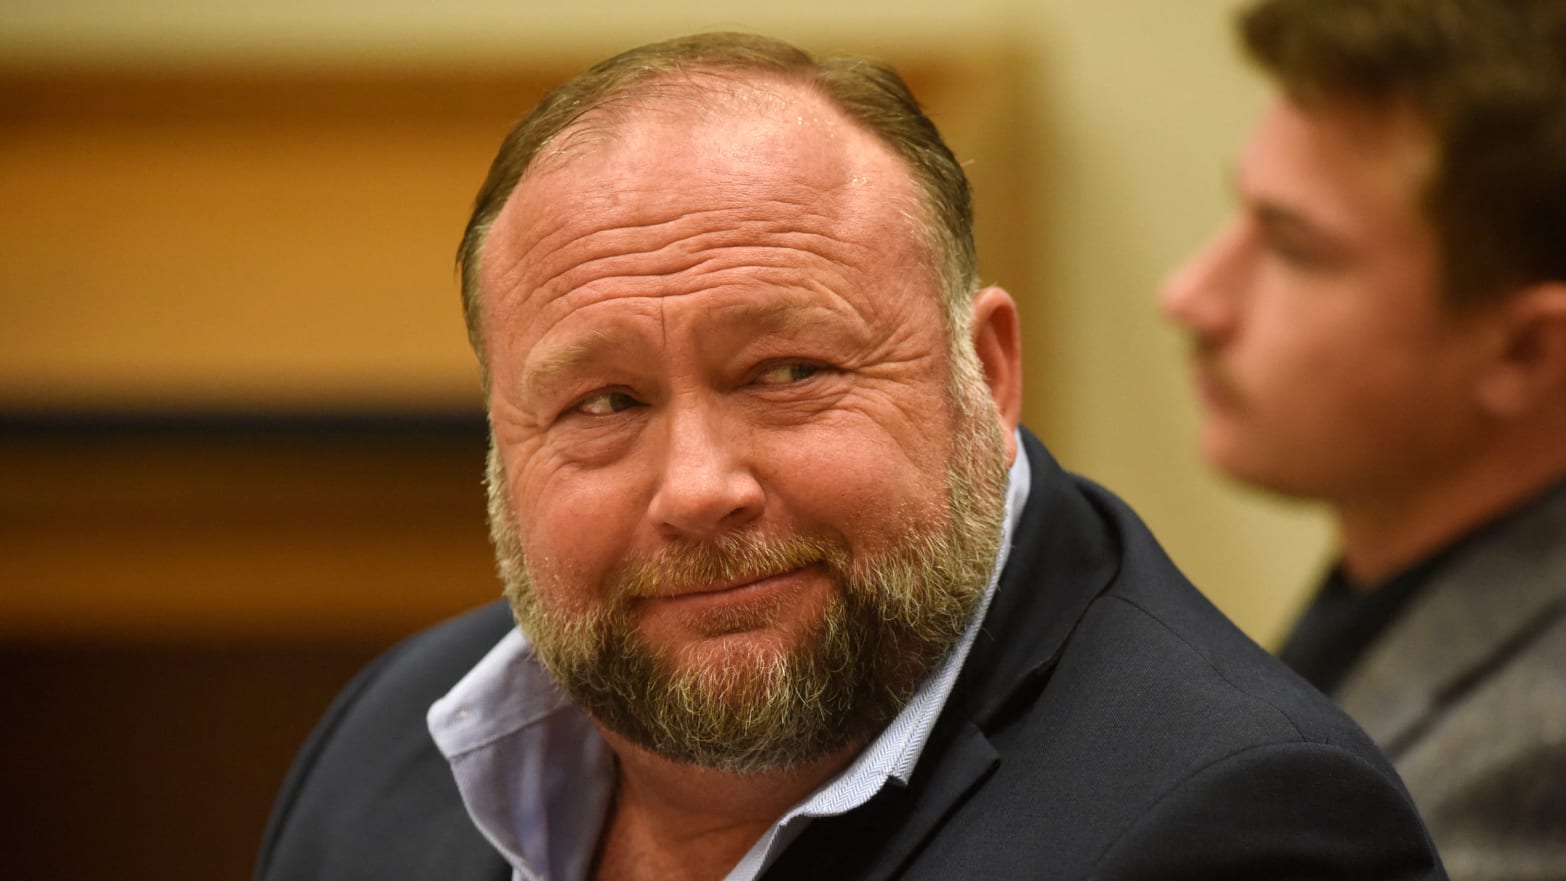 "Infowars founder Alex Jones prepares to testify during the Sandy Hook defamation damages trial at Connecticut Superior Court in Waterbury, Connecticut.